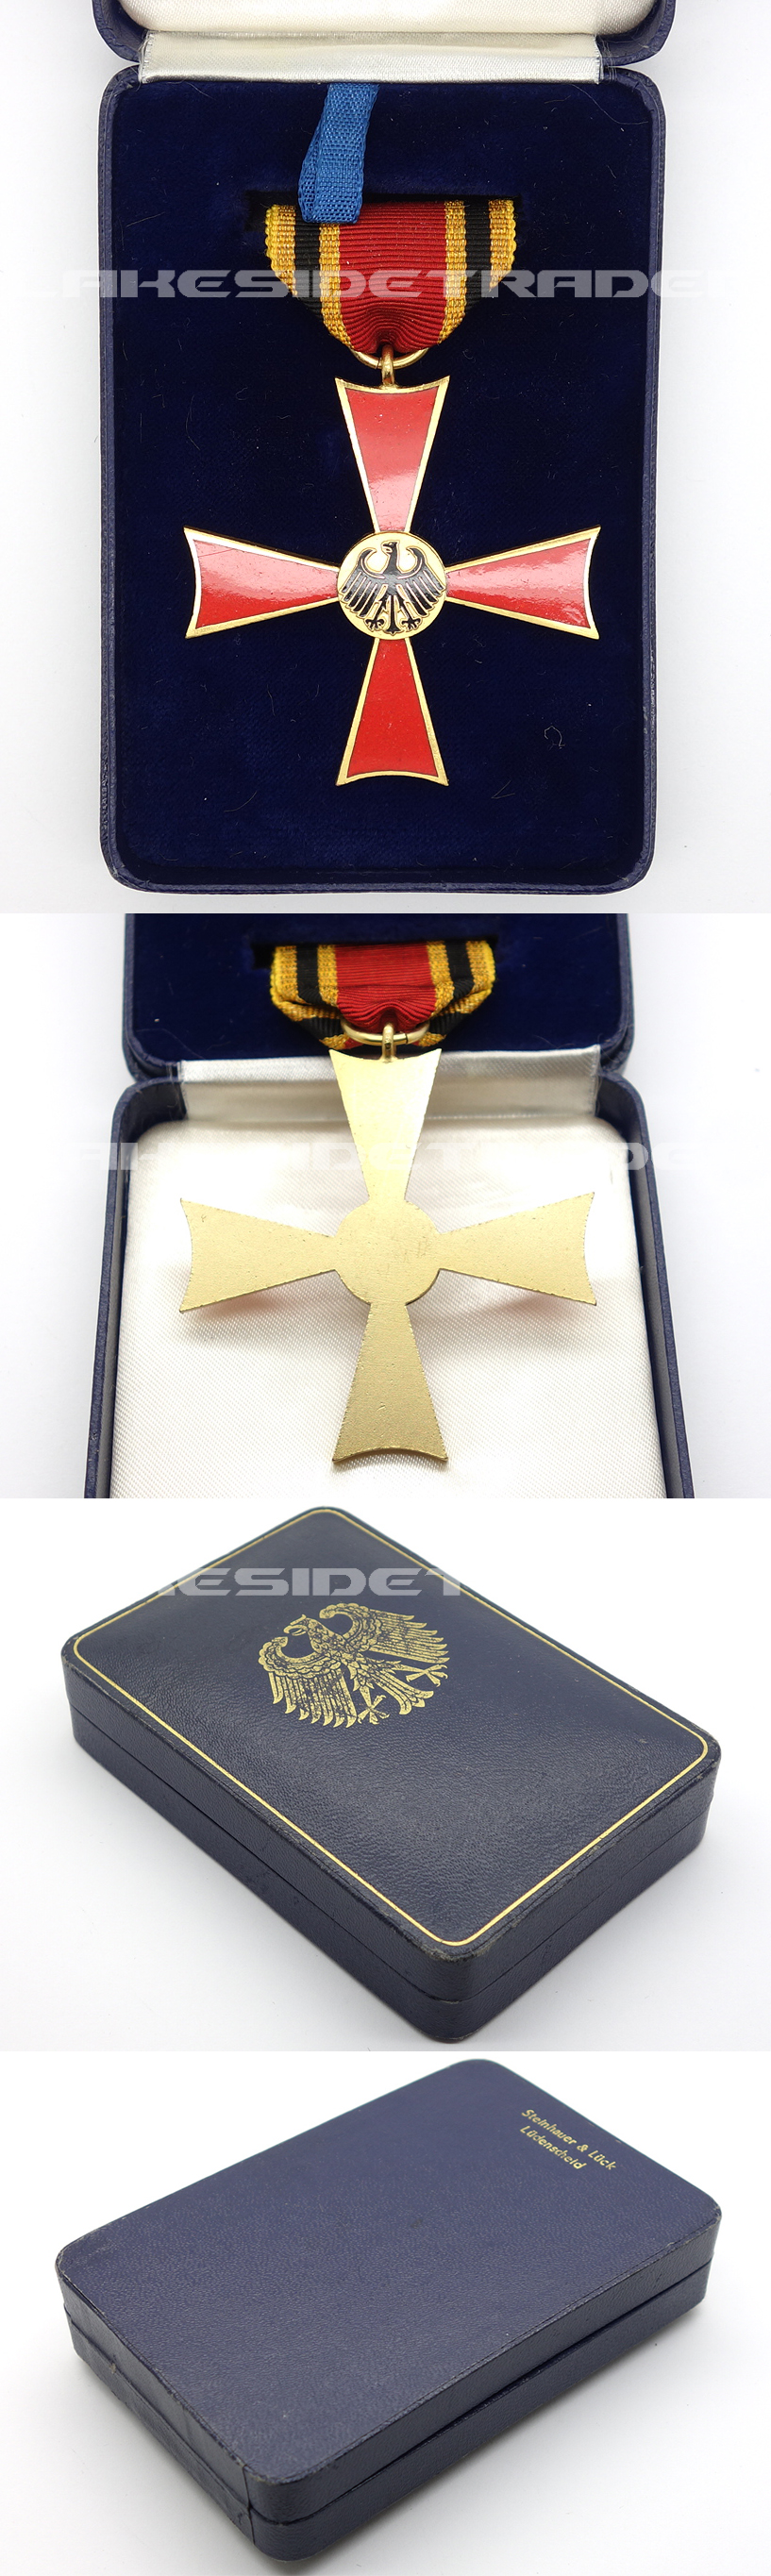 Cased Merit Cross of the Federal Republic of Germany by S&L